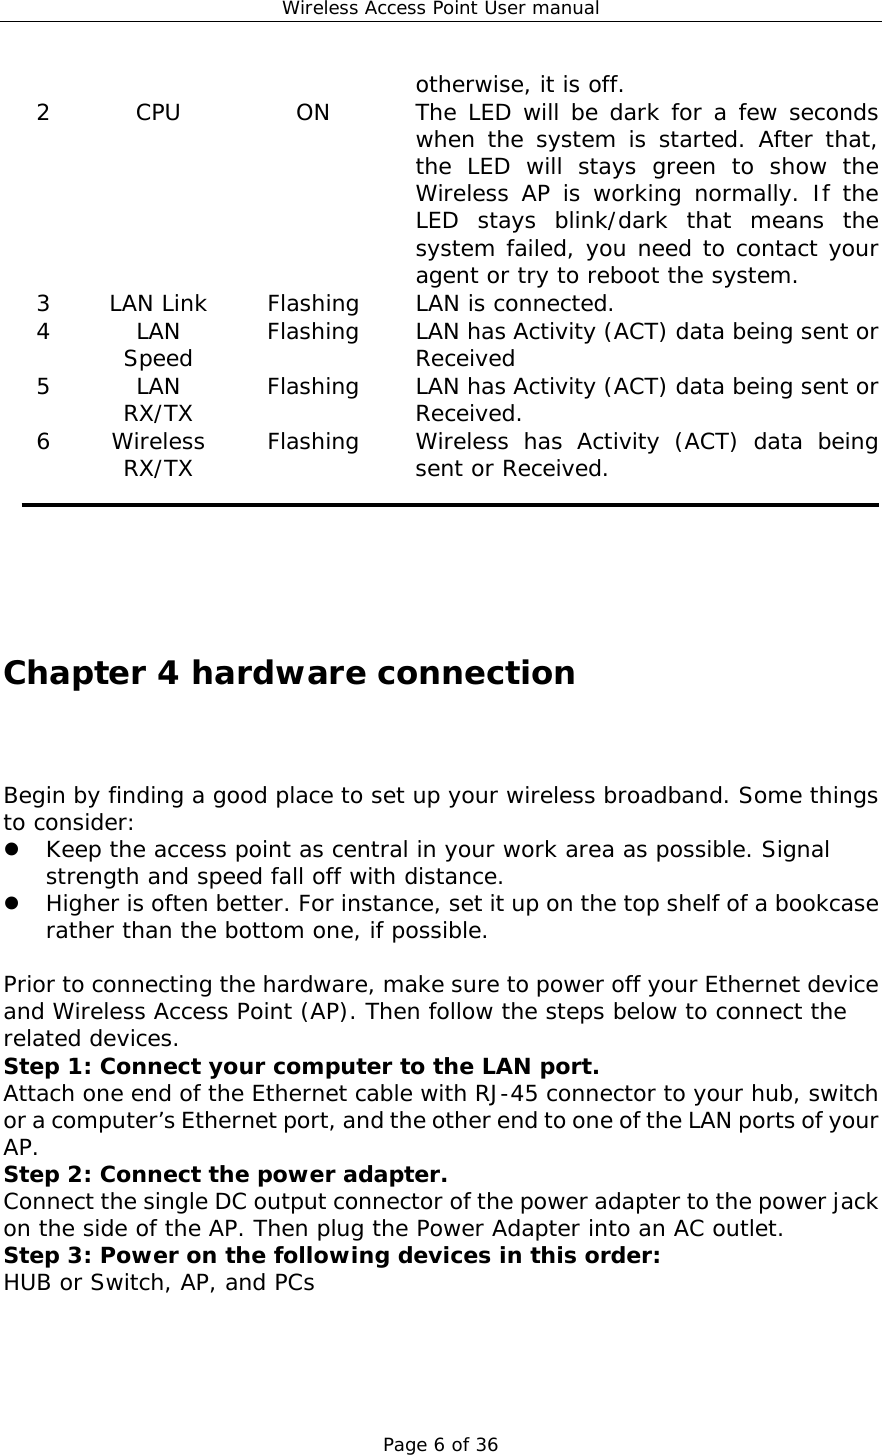 Wireless Access Point User manual Page 6 of 36 otherwise, it is off. 2  CPU  ON  The LED will be dark for a few seconds when the system is started. After that, the LED will stays green to show the Wireless AP is working normally. If the LED stays blink/dark that means the system failed, you need to contact your agent or try to reboot the system. 3  LAN Link  Flashing  LAN is connected. 4 LAN Speed  Flashing  LAN has Activity (ACT) data being sent or Received 5 LAN RX/TX  Flashing  LAN has Activity (ACT) data being sent or Received. 6 Wireless RX/TX  Flashing  Wireless has Activity (ACT) data being sent or Received.      Chapter 4 hardware connection Begin by finding a good place to set up your wireless broadband. Some things to consider:ٛ  z Keep the access point as central in your work area as possible. Signal strength and speed fall off with distance.  z Higher is often better. For instance, set it up on the top shelf of a bookcase rather than the bottom one, if possible.  Prior to connecting the hardware, make sure to power off your Ethernet device and Wireless Access Point (AP). Then follow the steps below to connect the related devices. Step 1: Connect your computer to the LAN port. Attach one end of the Ethernet cable with RJ-45 connector to your hub, switch or a computer’s Ethernet port, and the other end to one of the LAN ports of your AP. Step 2: Connect the power adapter. Connect the single DC output connector of the power adapter to the power jack on the side of the AP. Then plug the Power Adapter into an AC outlet. Step 3: Power on the following devices in this order: HUB or Switch, AP, and PCs    